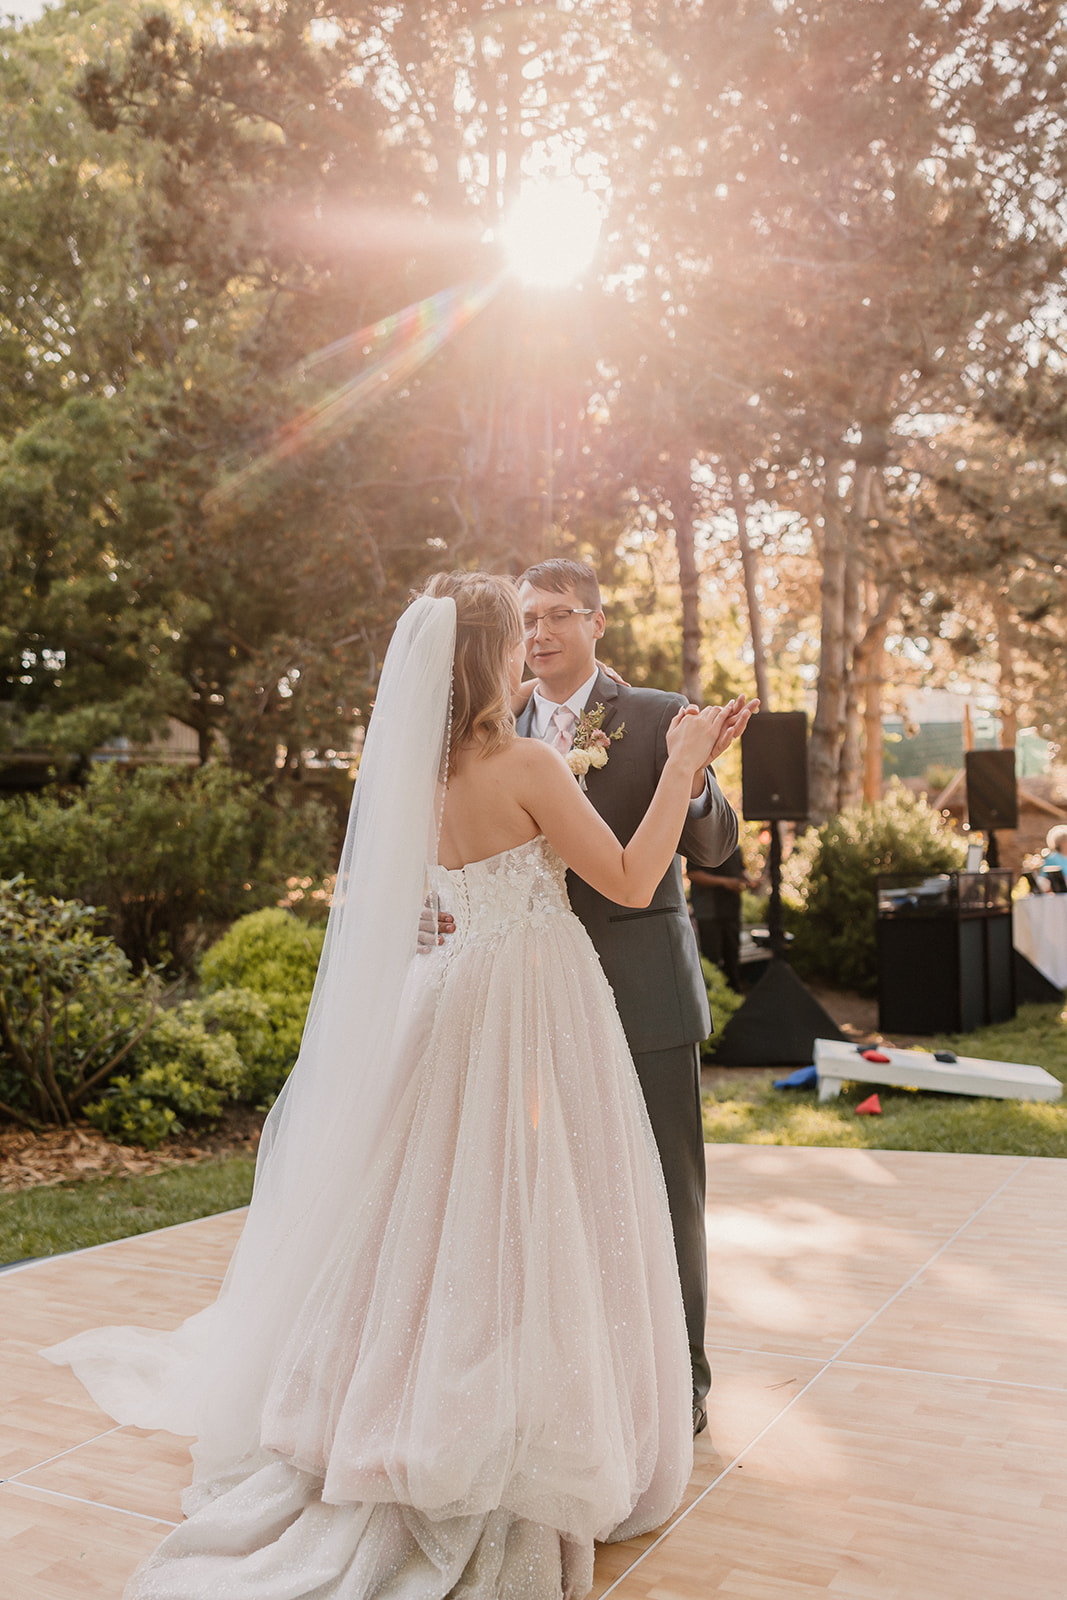 A couple, wearing a suit and a gown, share a kiss on an outdoor dance floor surrounded by trees and greenery, under the sunlight at their wedding at the gardens in heather farms